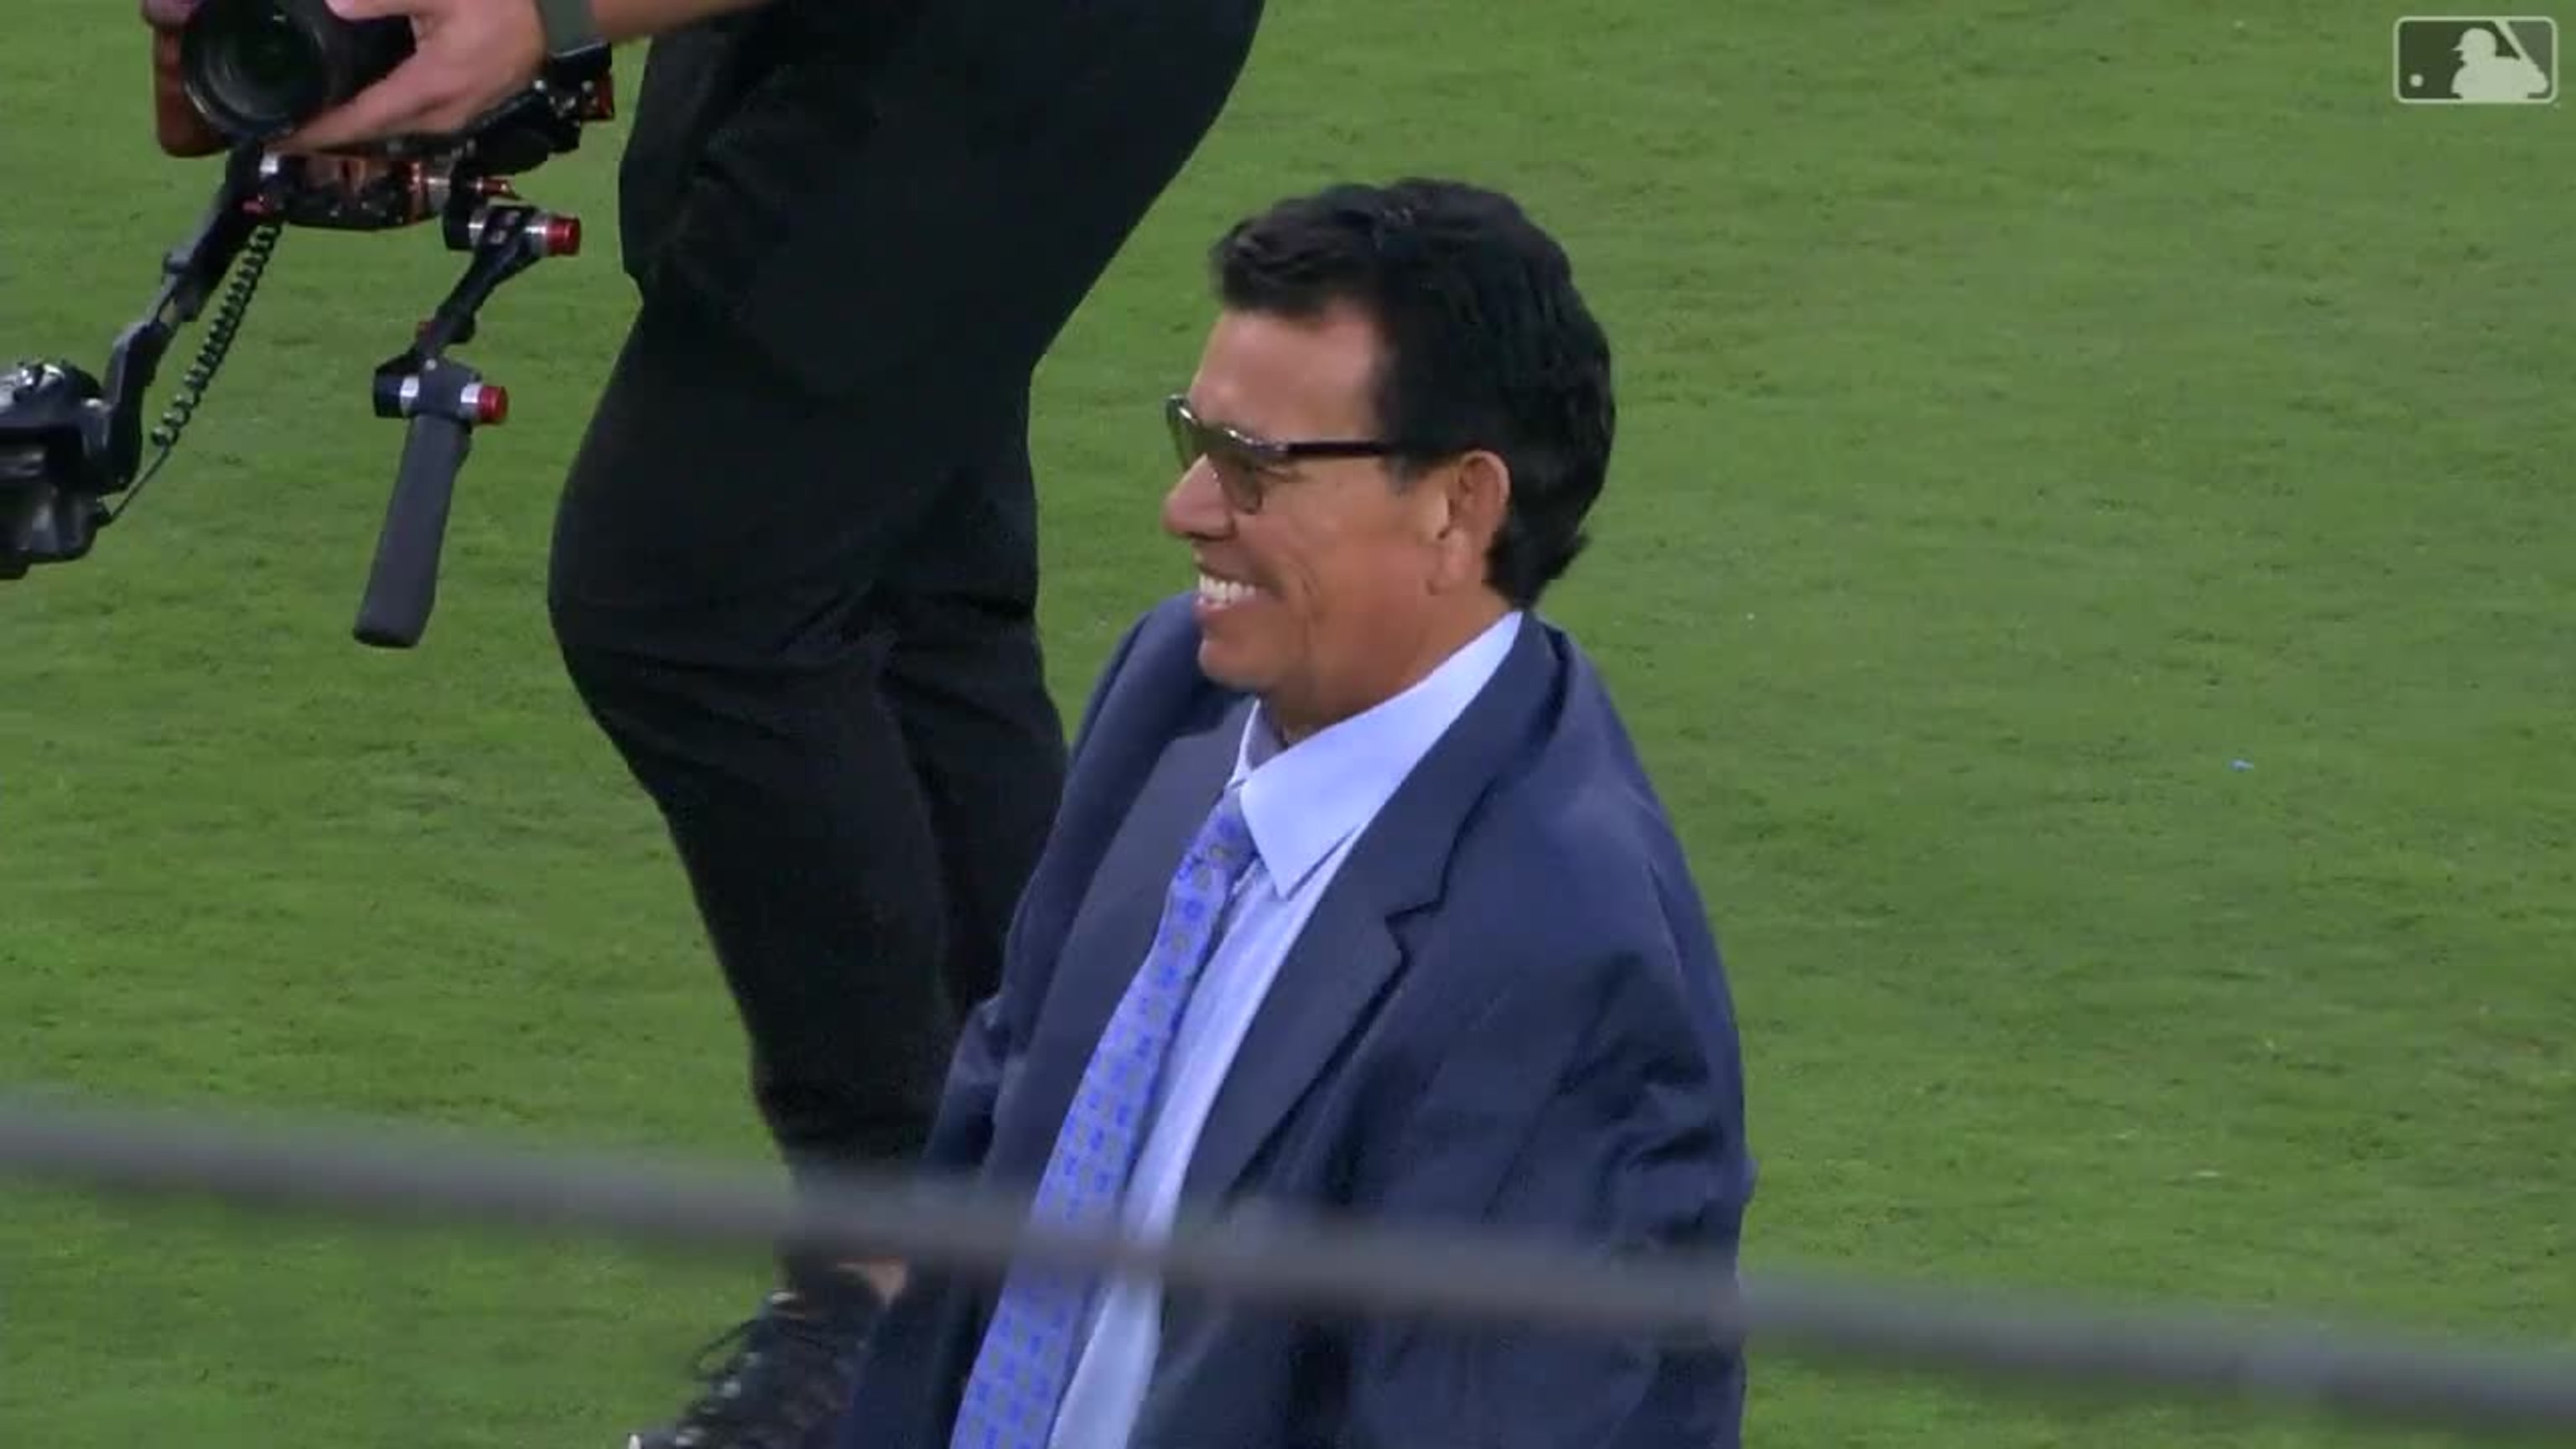 MLB on X: RT @Dodgers: There will never be another 34. Congratulations Fernando  Valenzuela on having your No. 34 retired!  / X